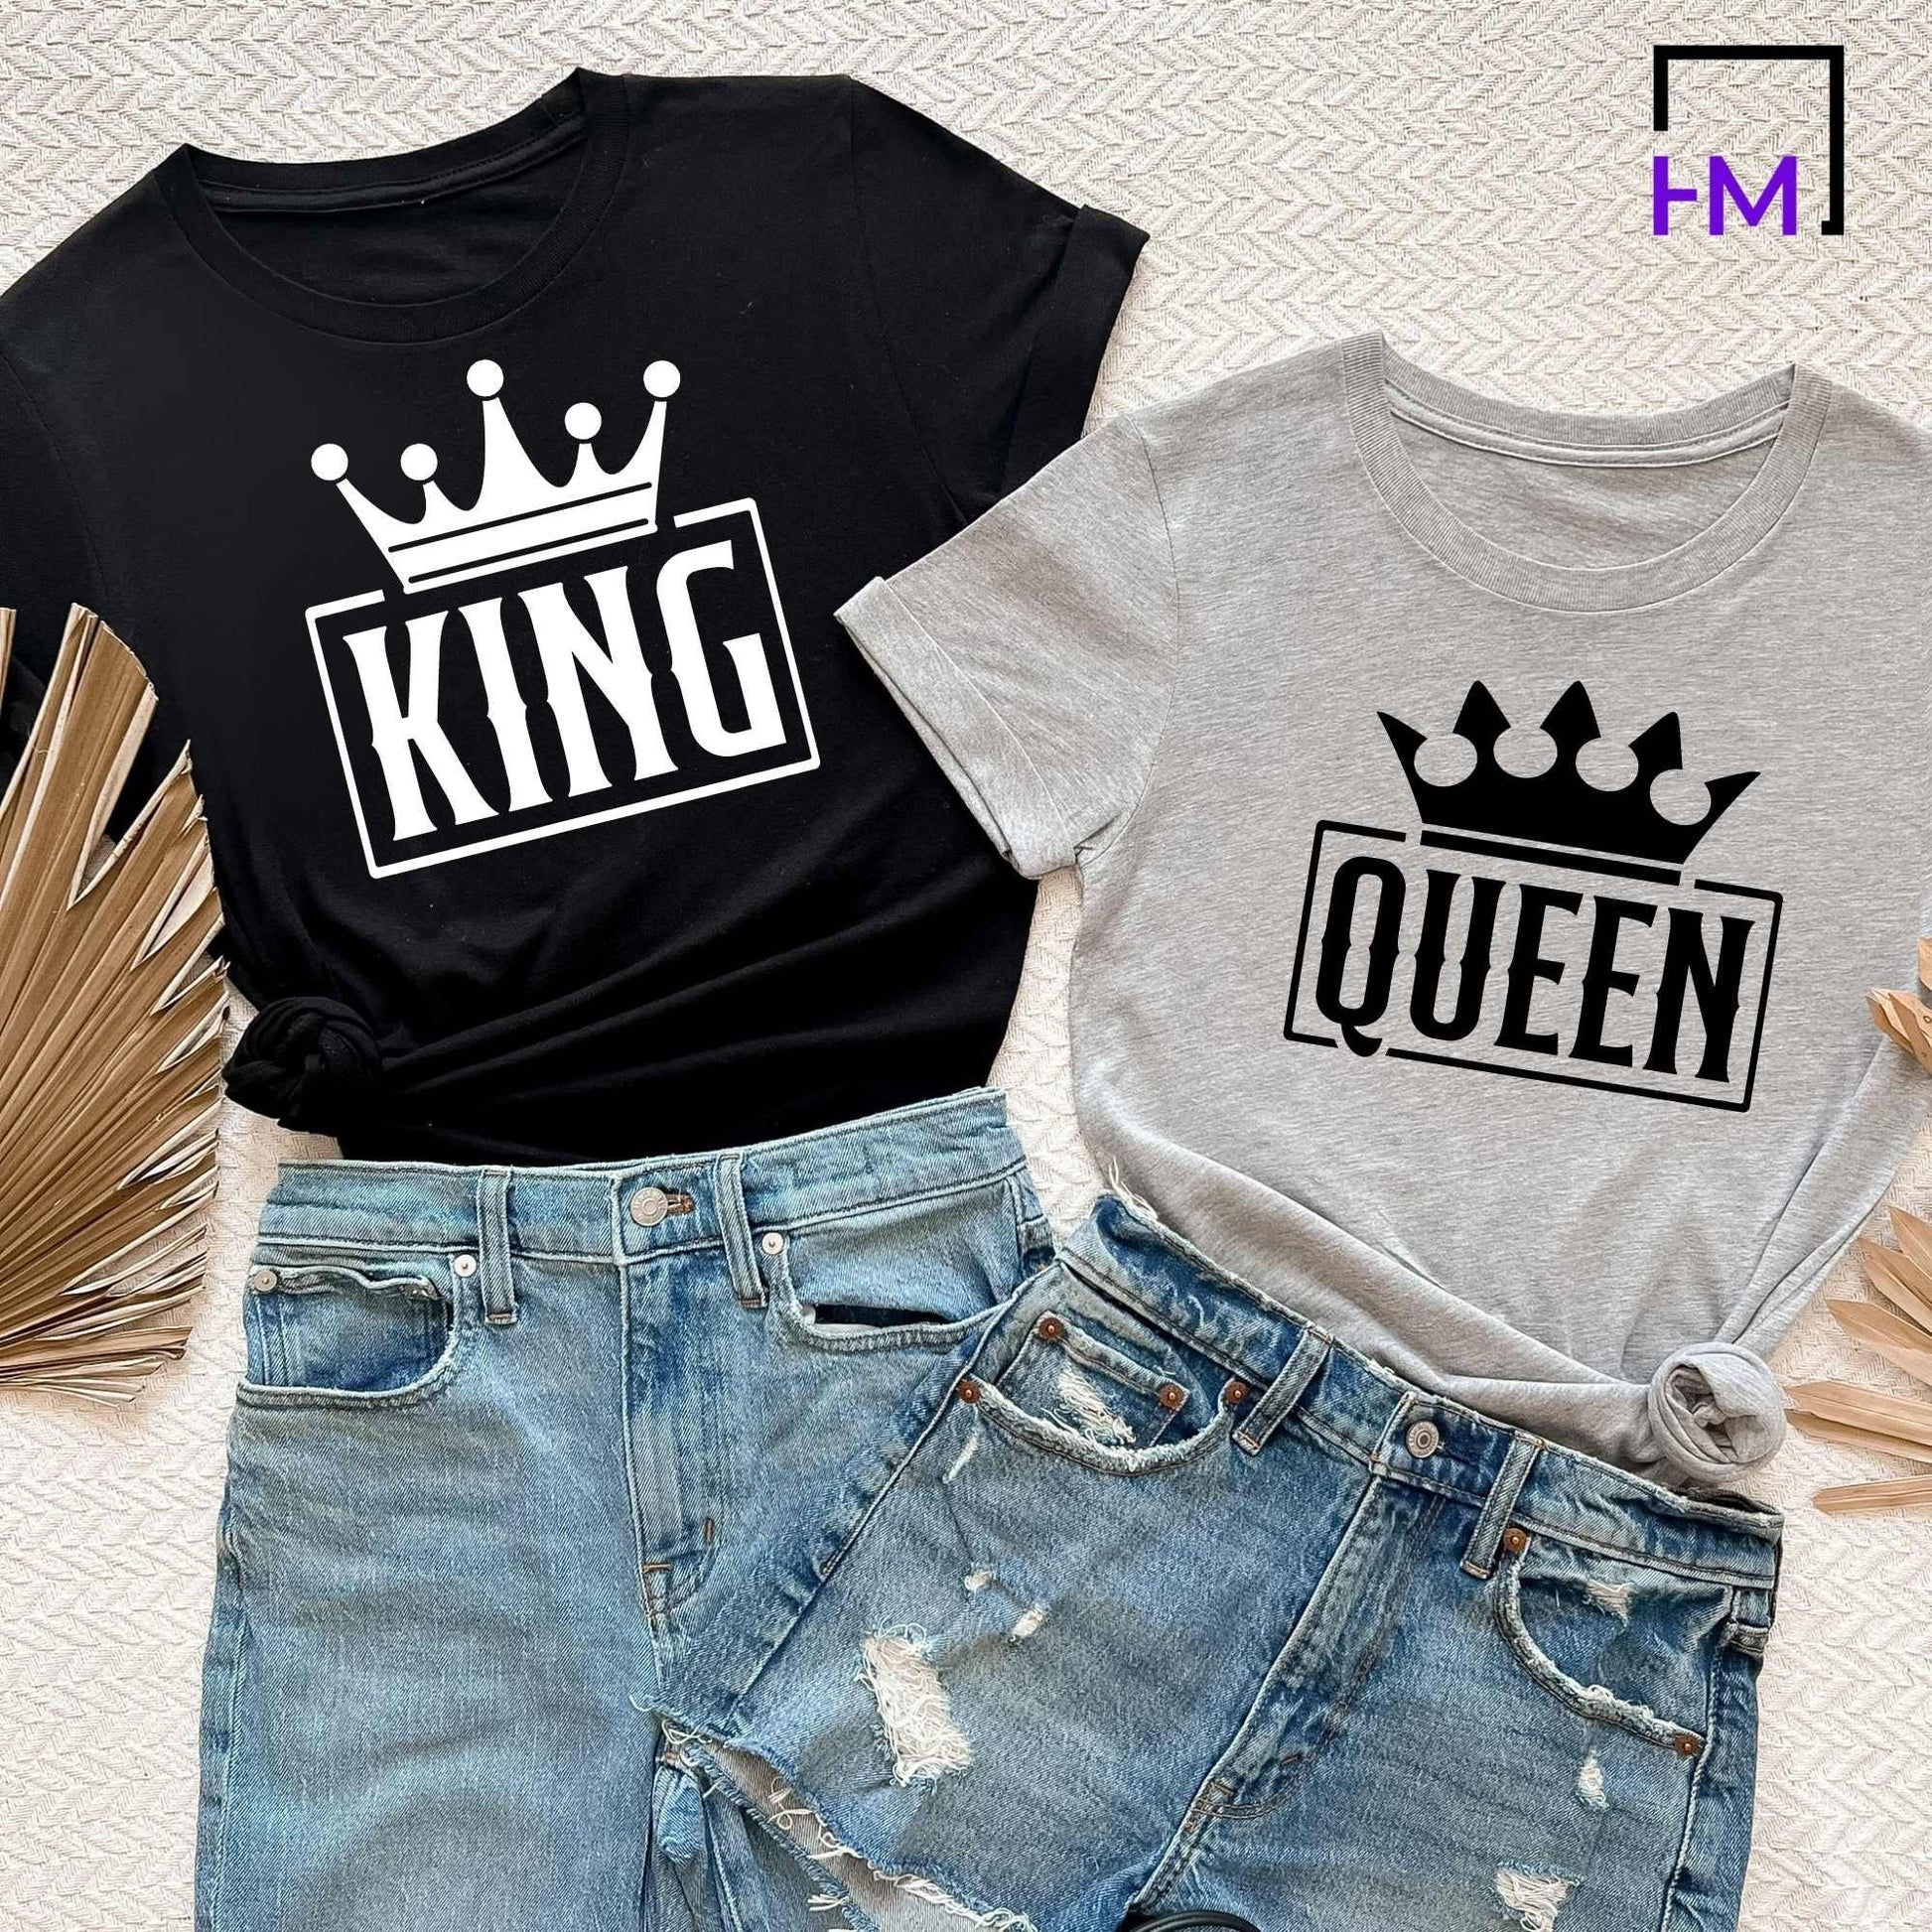 Funny Couples Shirts, Couples gift for boyfriend, Black King African Queen, Engagement Announcement, Couples Sweater/Hoodie, Wedding Present HMDesignStudioUS